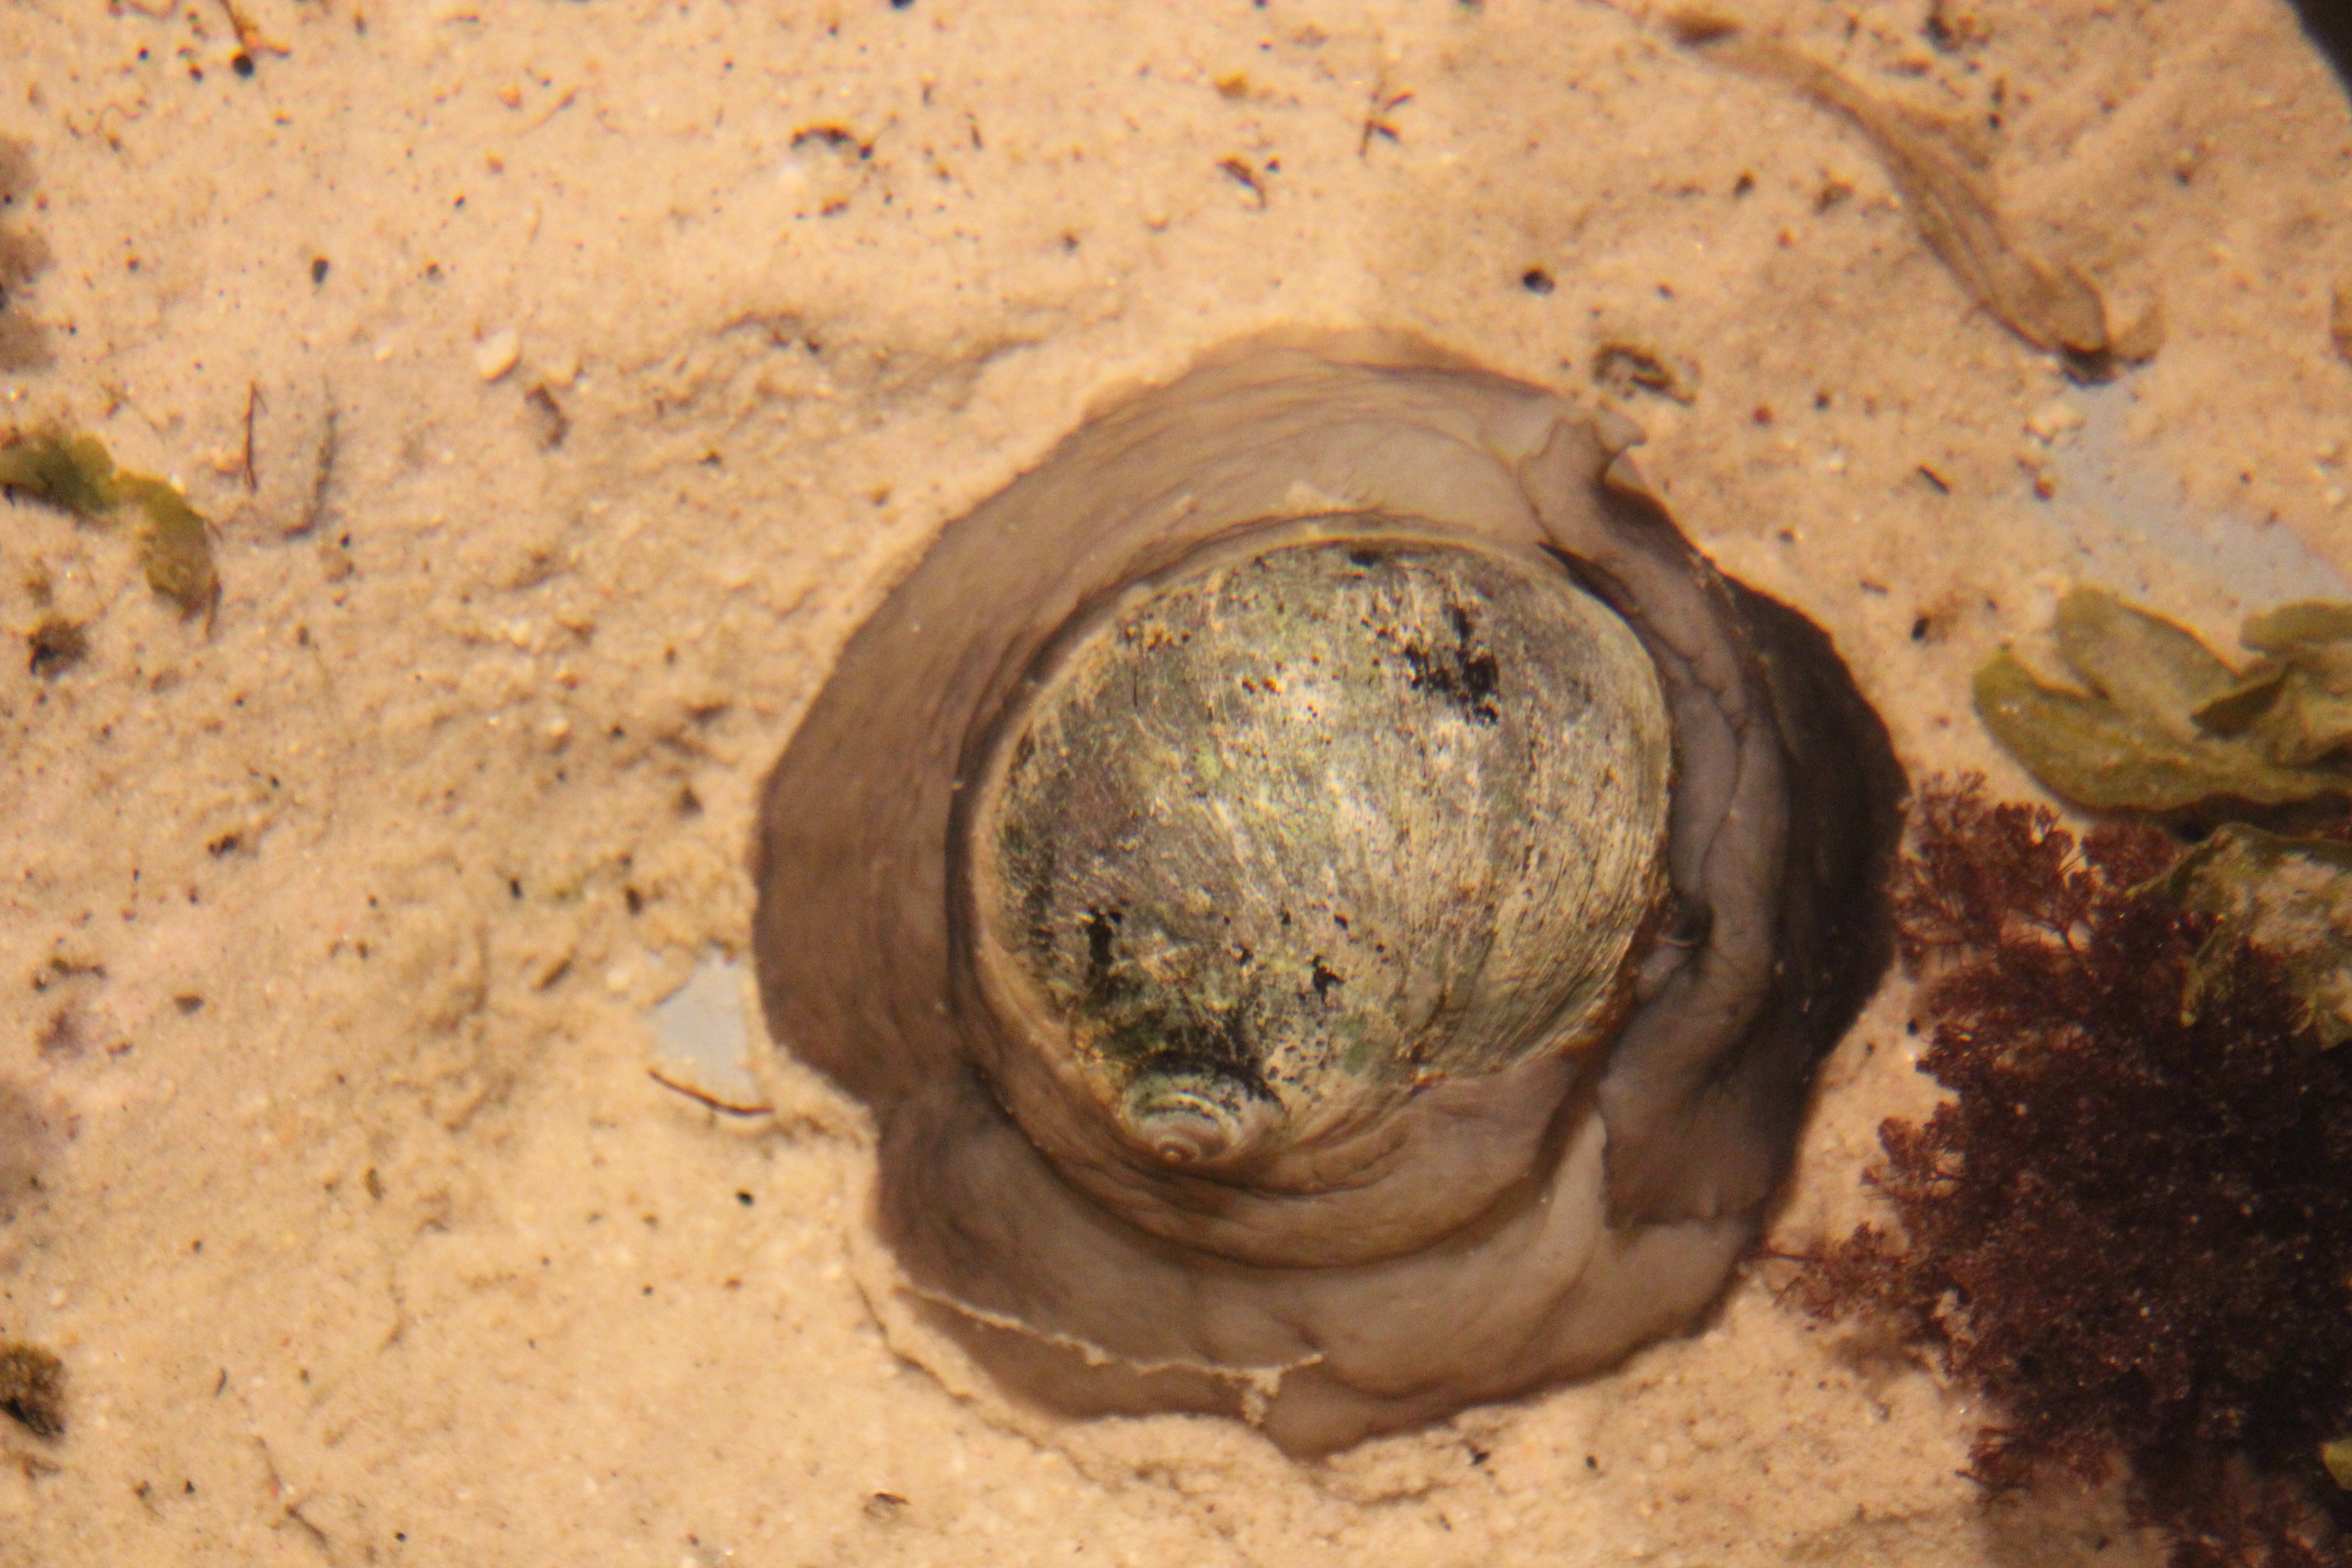 Northern moon snail (top view)